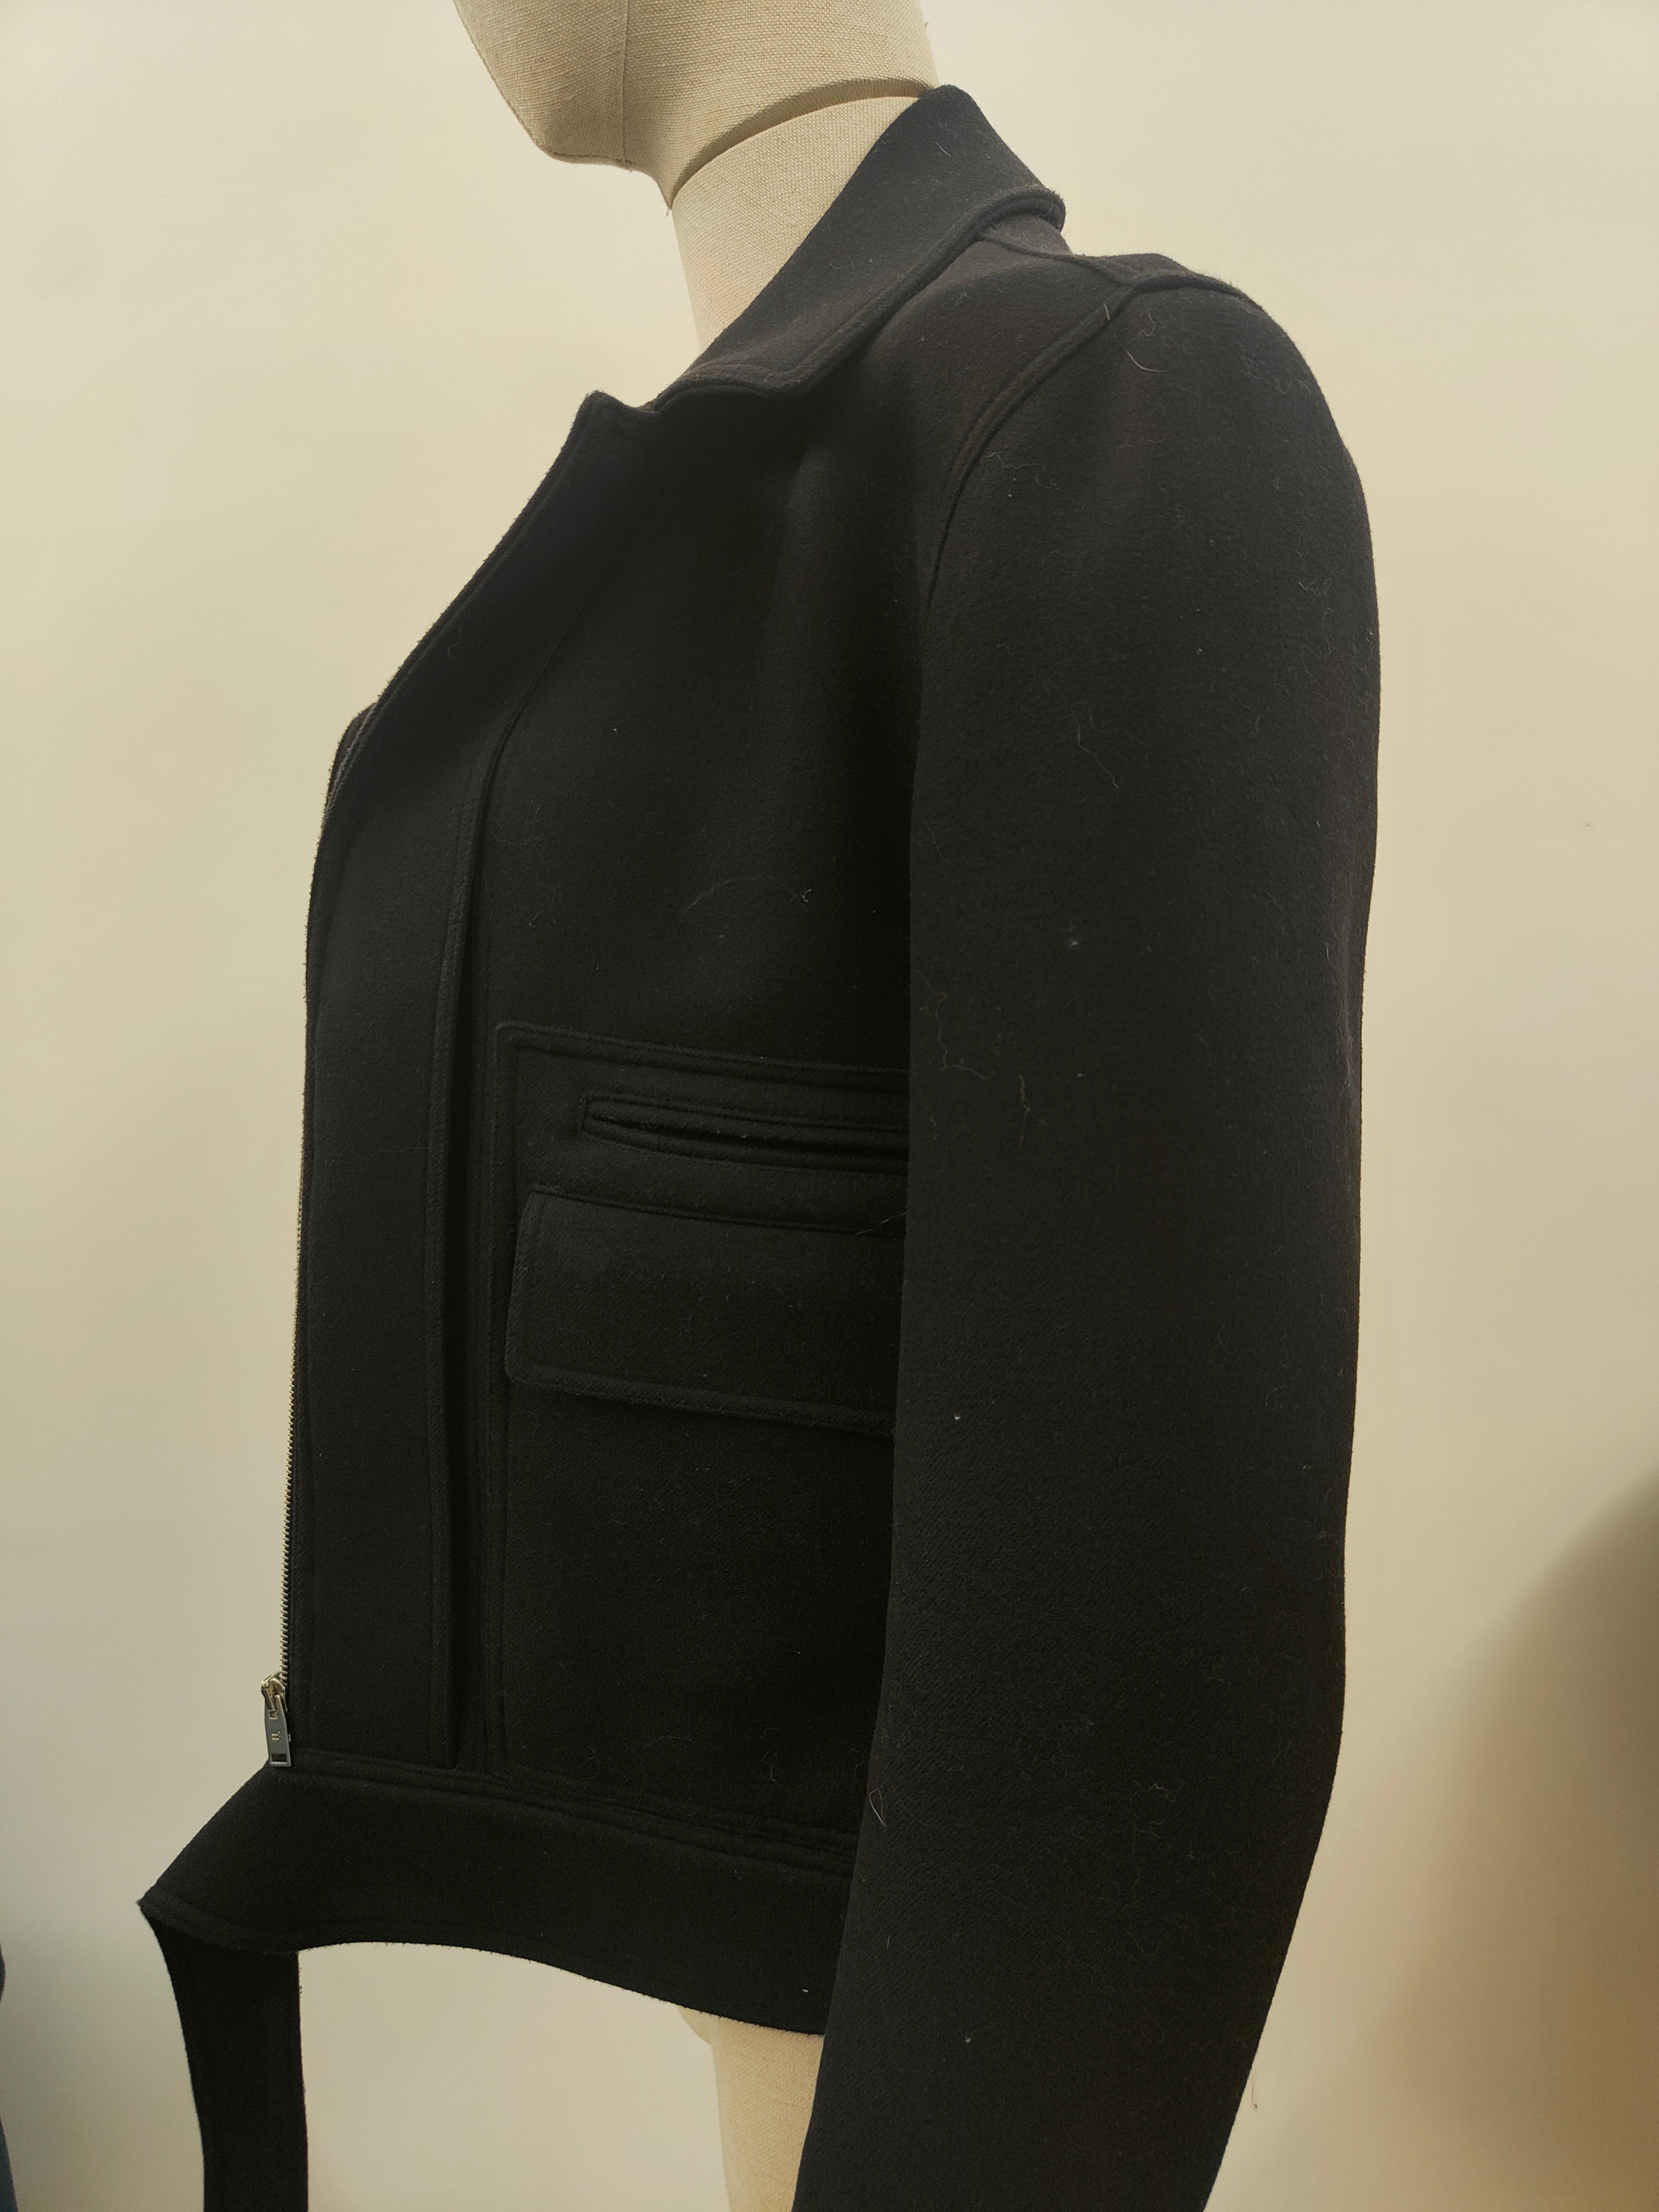 Balenciaga black wool jacket In Excellent Condition For Sale In Capri, IT